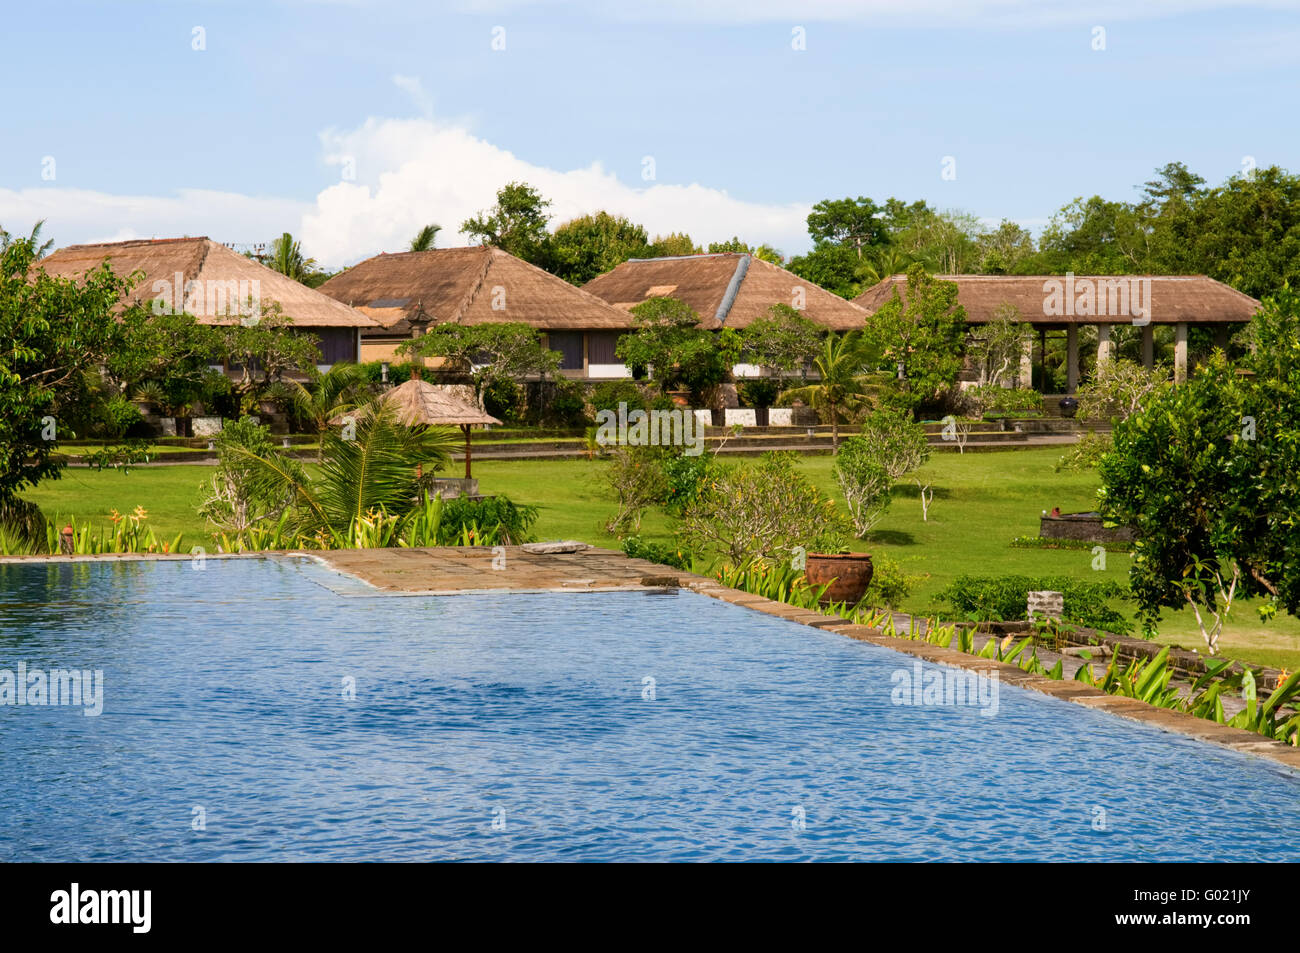 Villas and swimming pool in green field of India Stock Photo